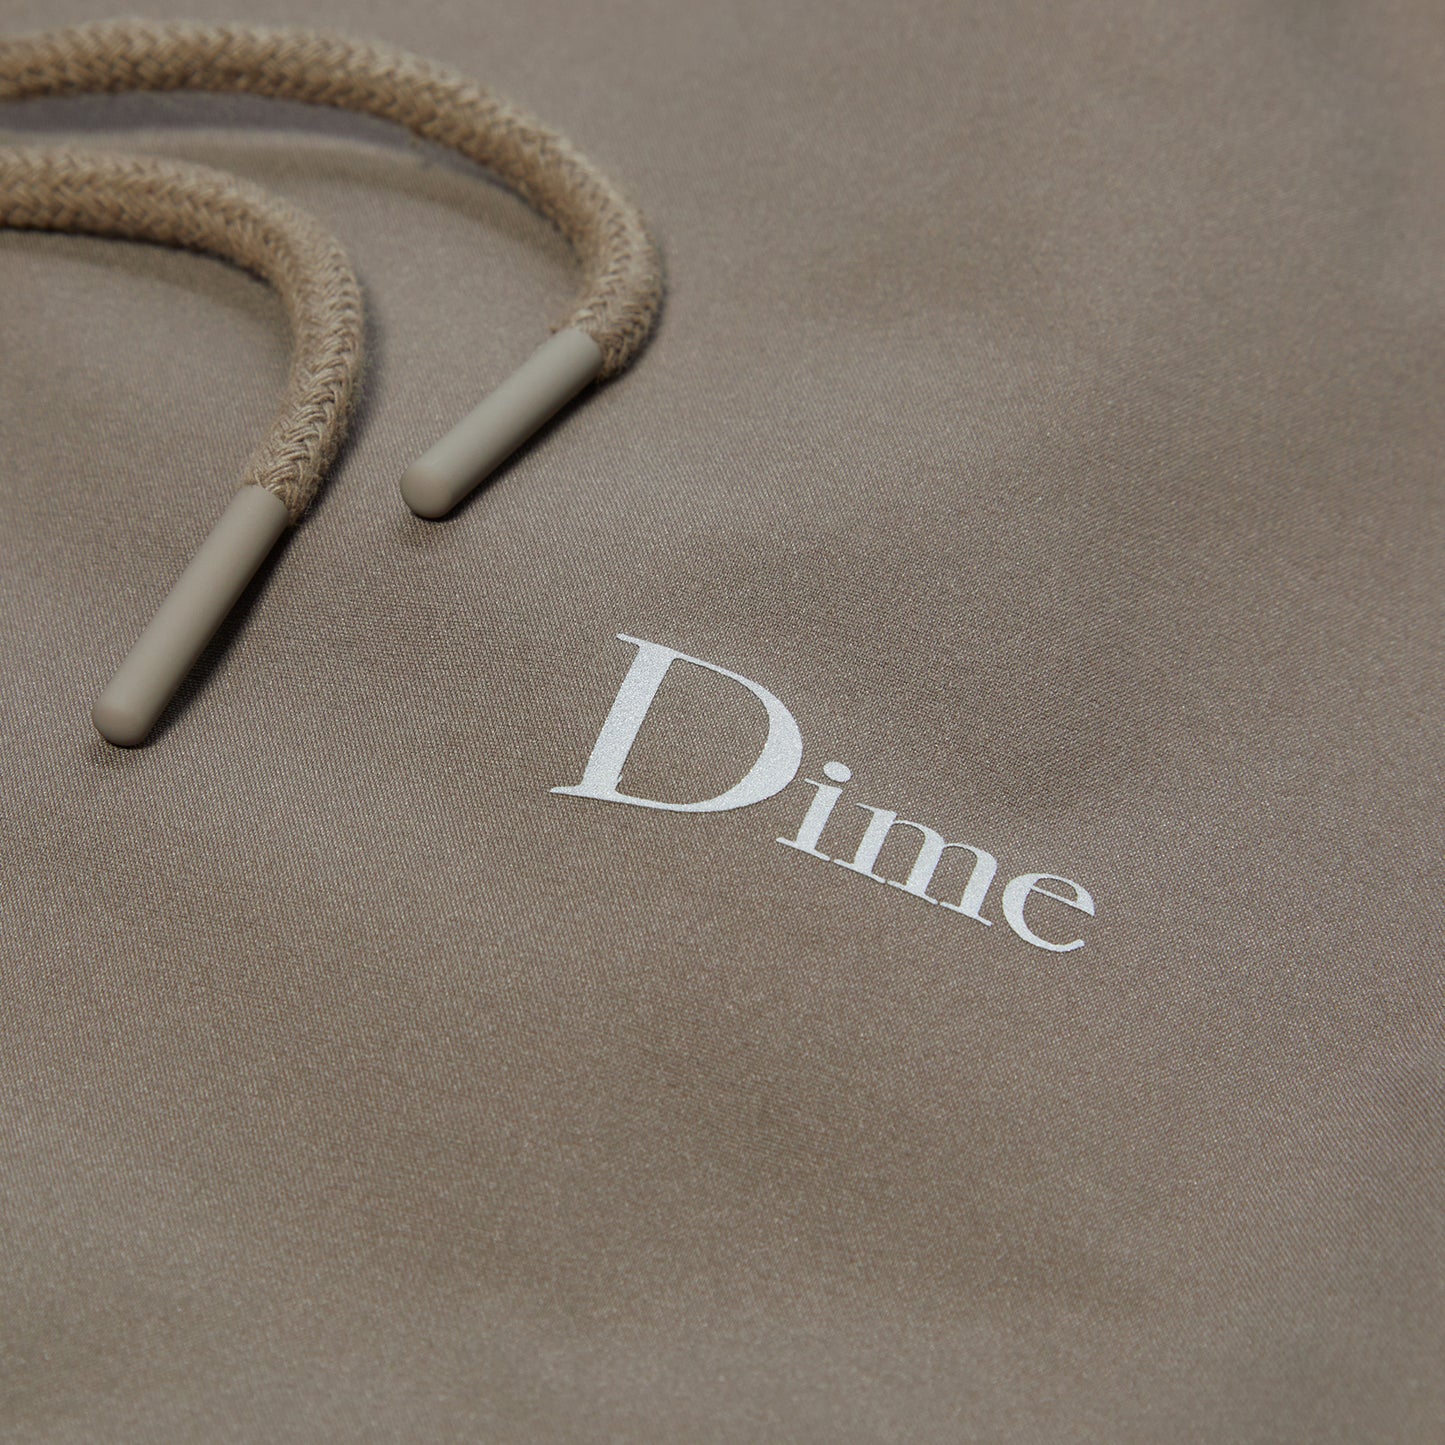 Dime Range Relaxed Sports Pants (Taupe)